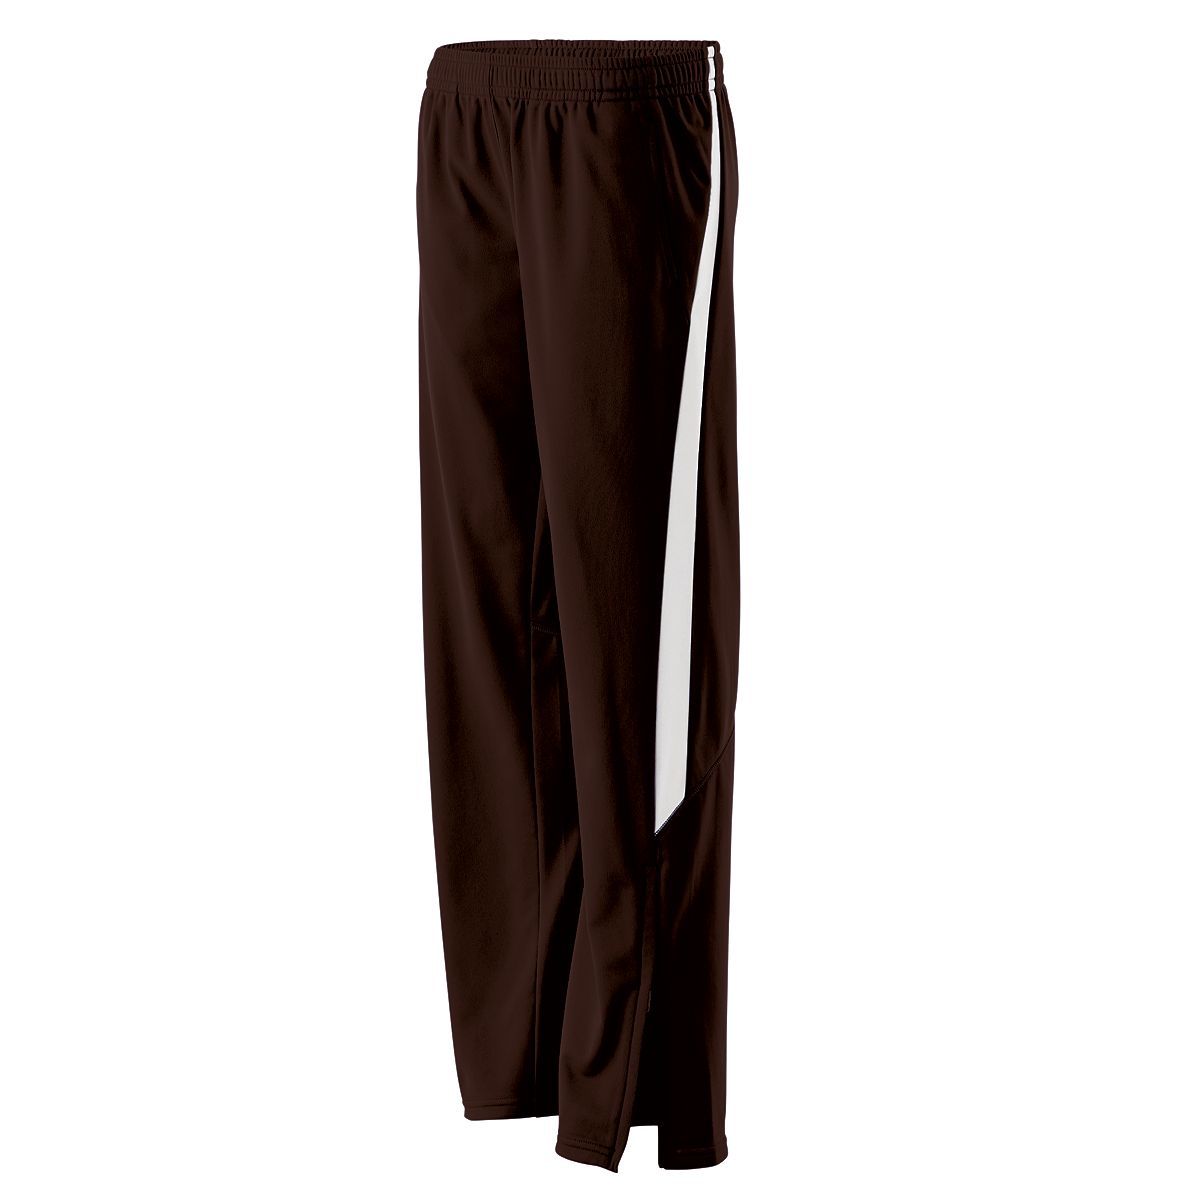 Holloway Ladies Determination Pant in Brown/White  -Part of the Ladies, Ladies-Pants, Pants, Holloway product lines at KanaleyCreations.com